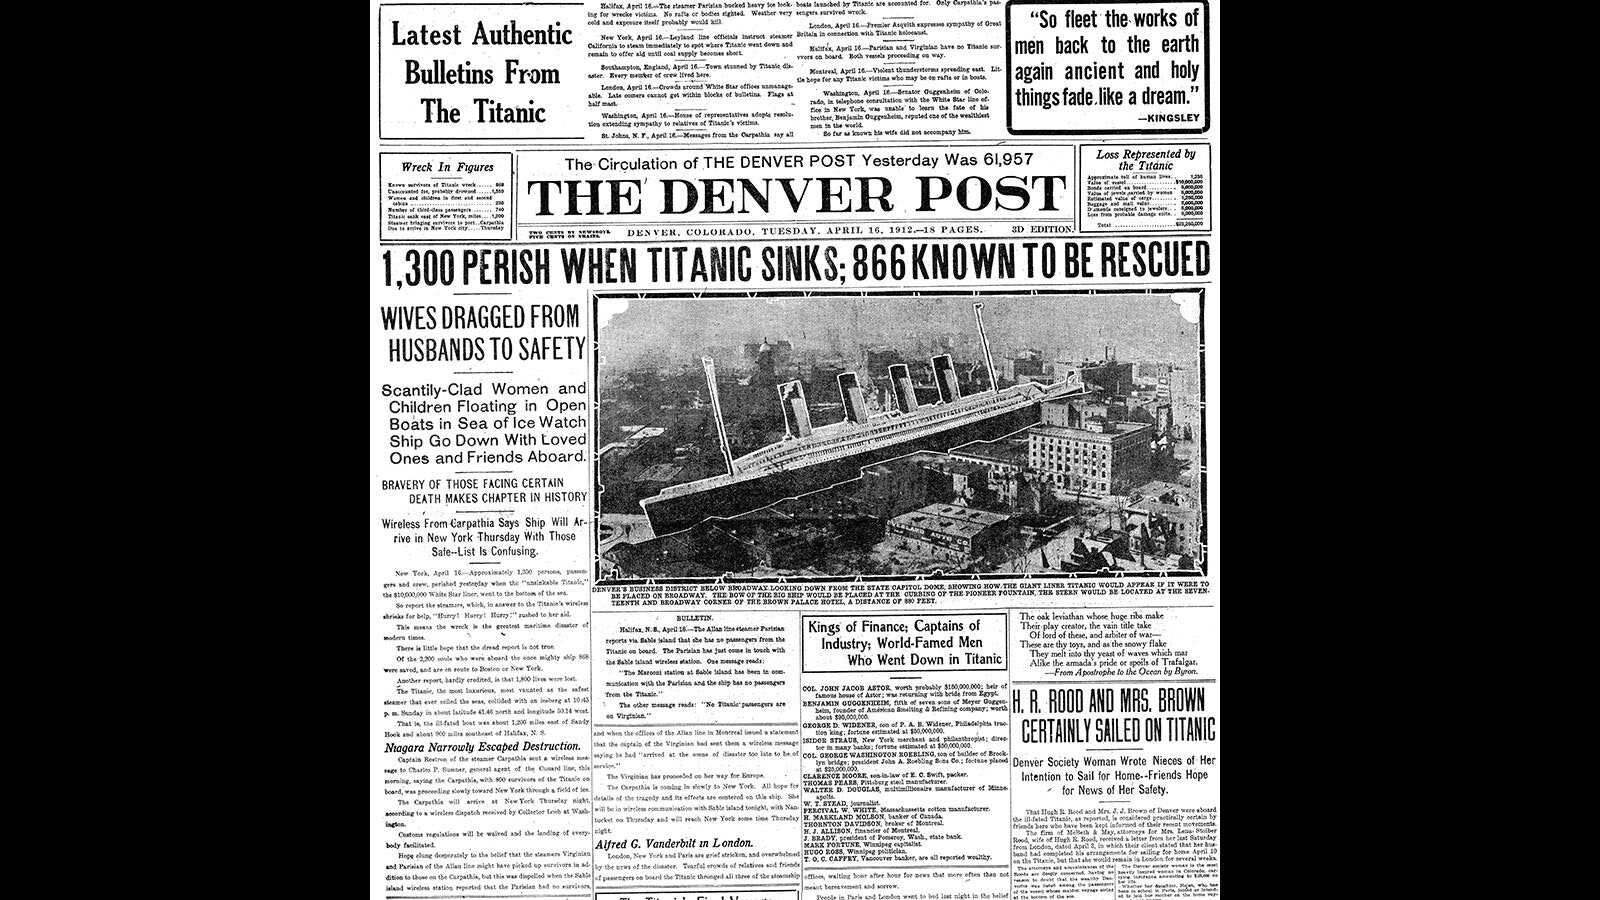 Headline of The Denver Post on the tragedy of the sinking of the RMS Titanic, April 16, 1912. The headline reads "1,300 Perish When Titanic Sinks; 866 Known To Be Rescued."